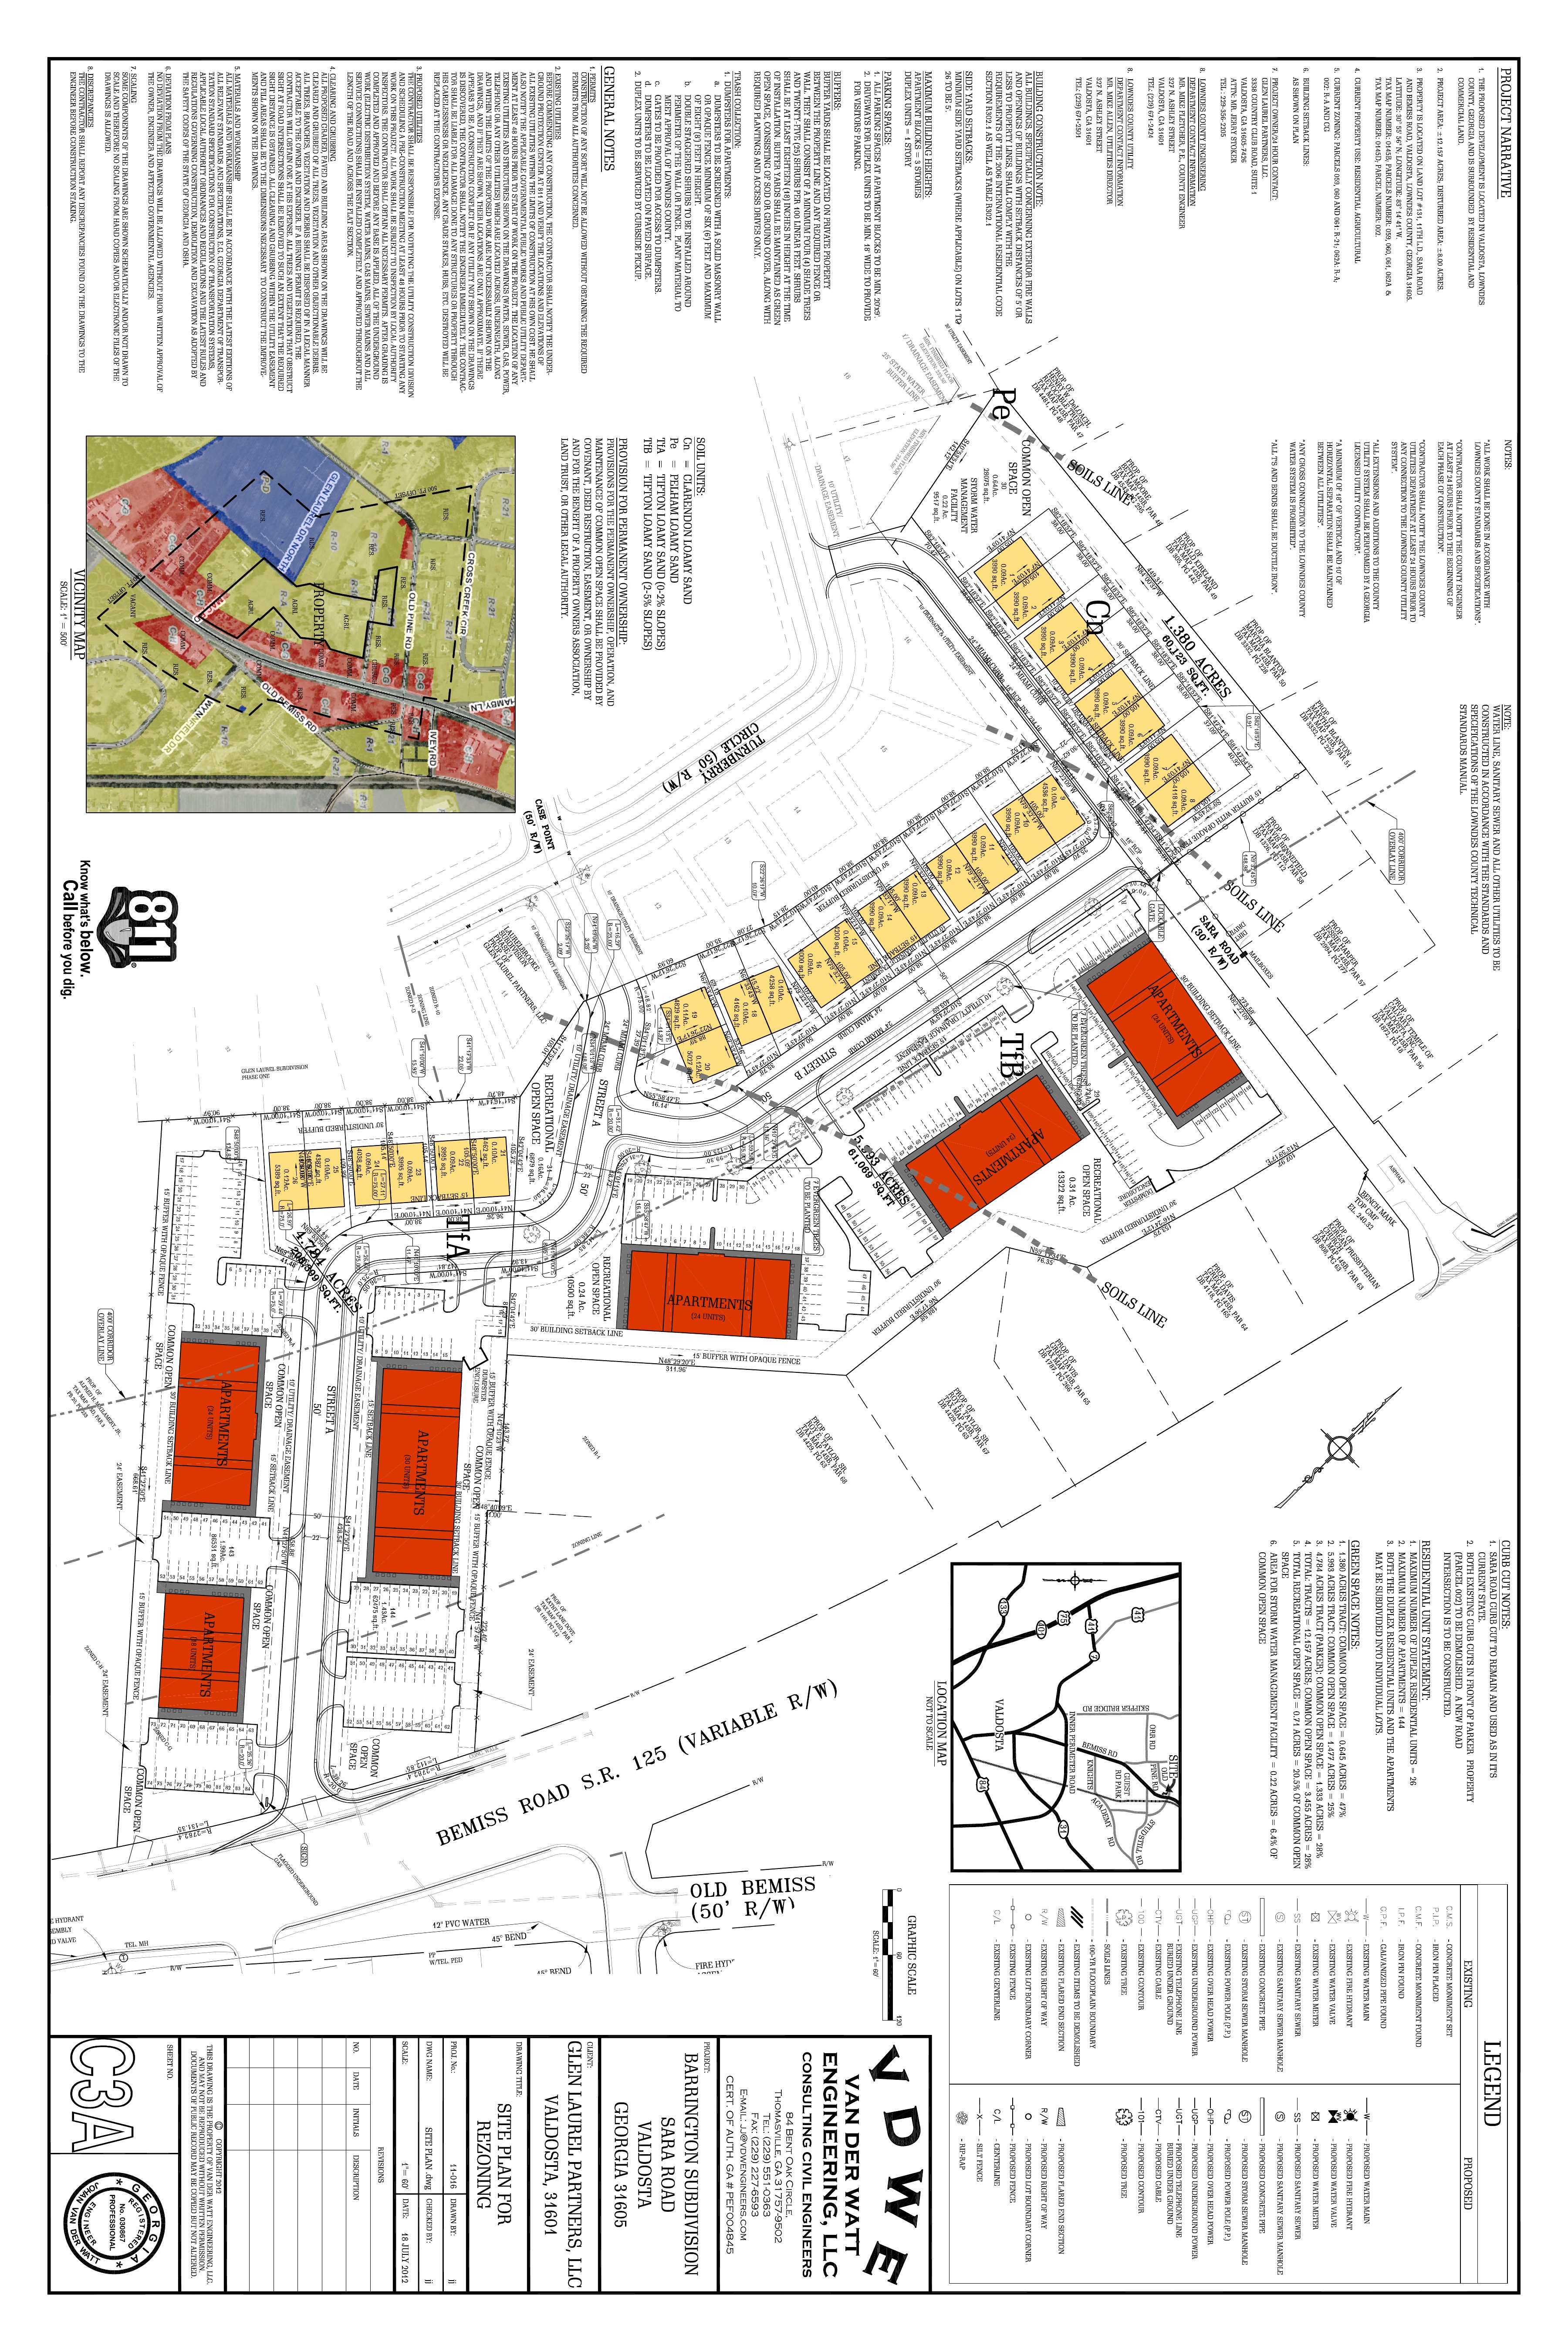 08.13.12 Site Plan - FINAL LCBOC APPROVED